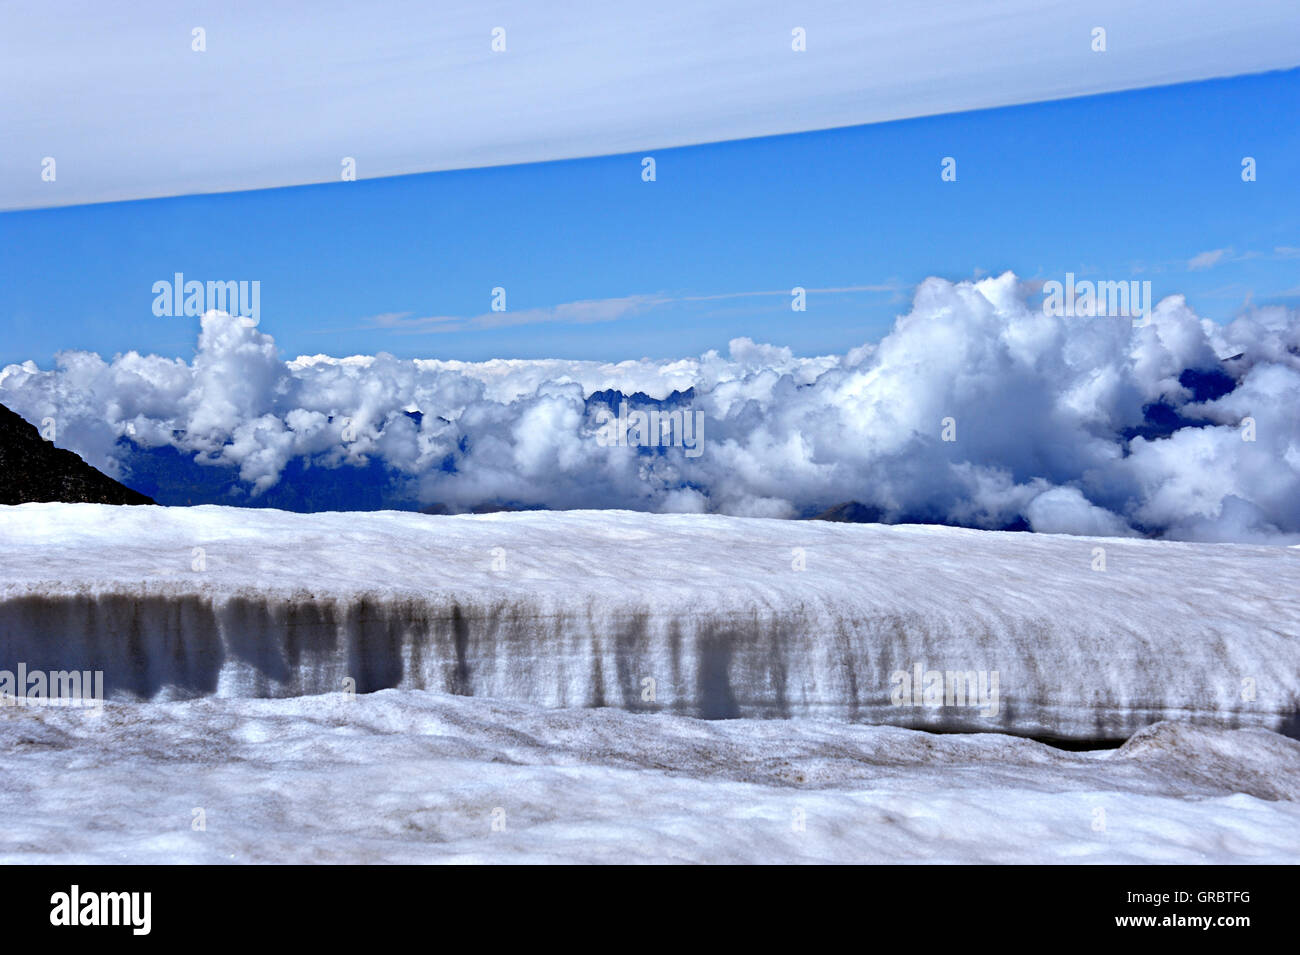 View Over The Glacier With The Weather Front Of Different Layers, Clouds And Blue Sky, Cirrostratus Cloudes Above, French Alps, France Stock Photo